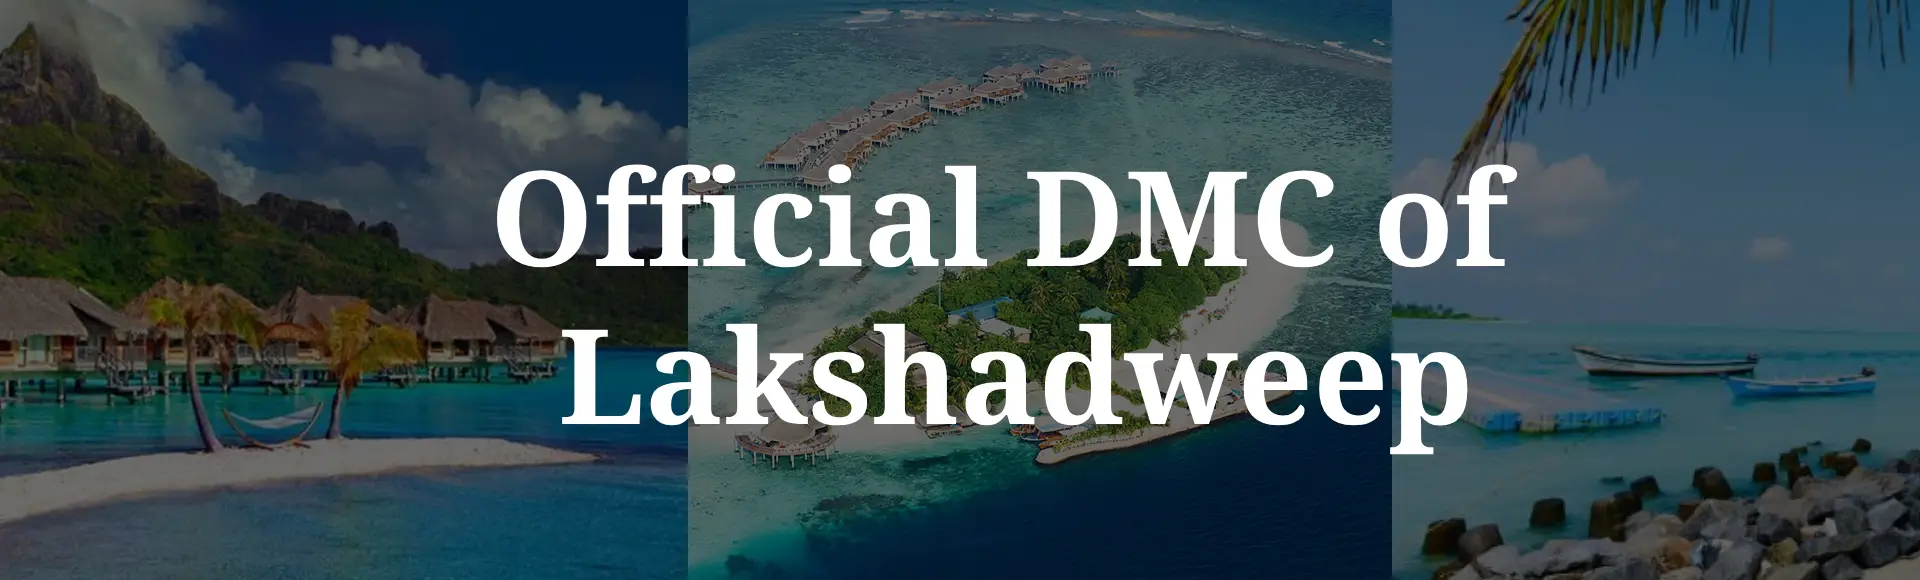 Lakshadweep holiday tour packages, bali travel cost from india